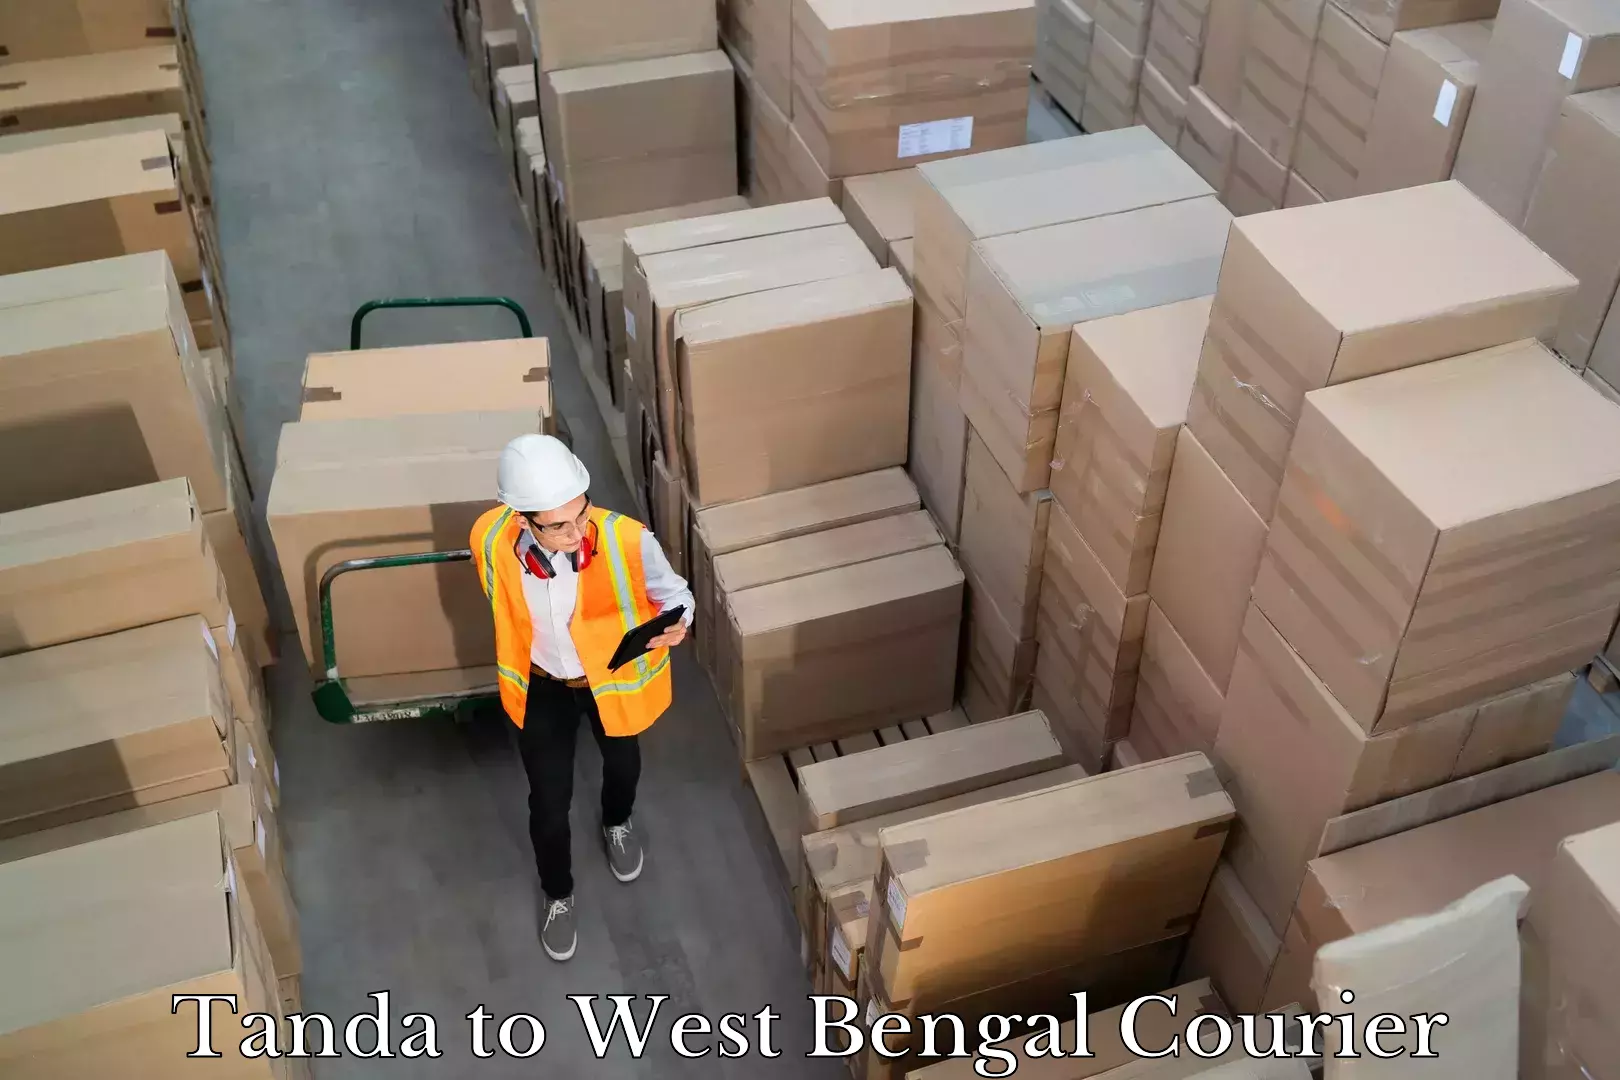 Nationwide delivery network Tanda to West Bengal